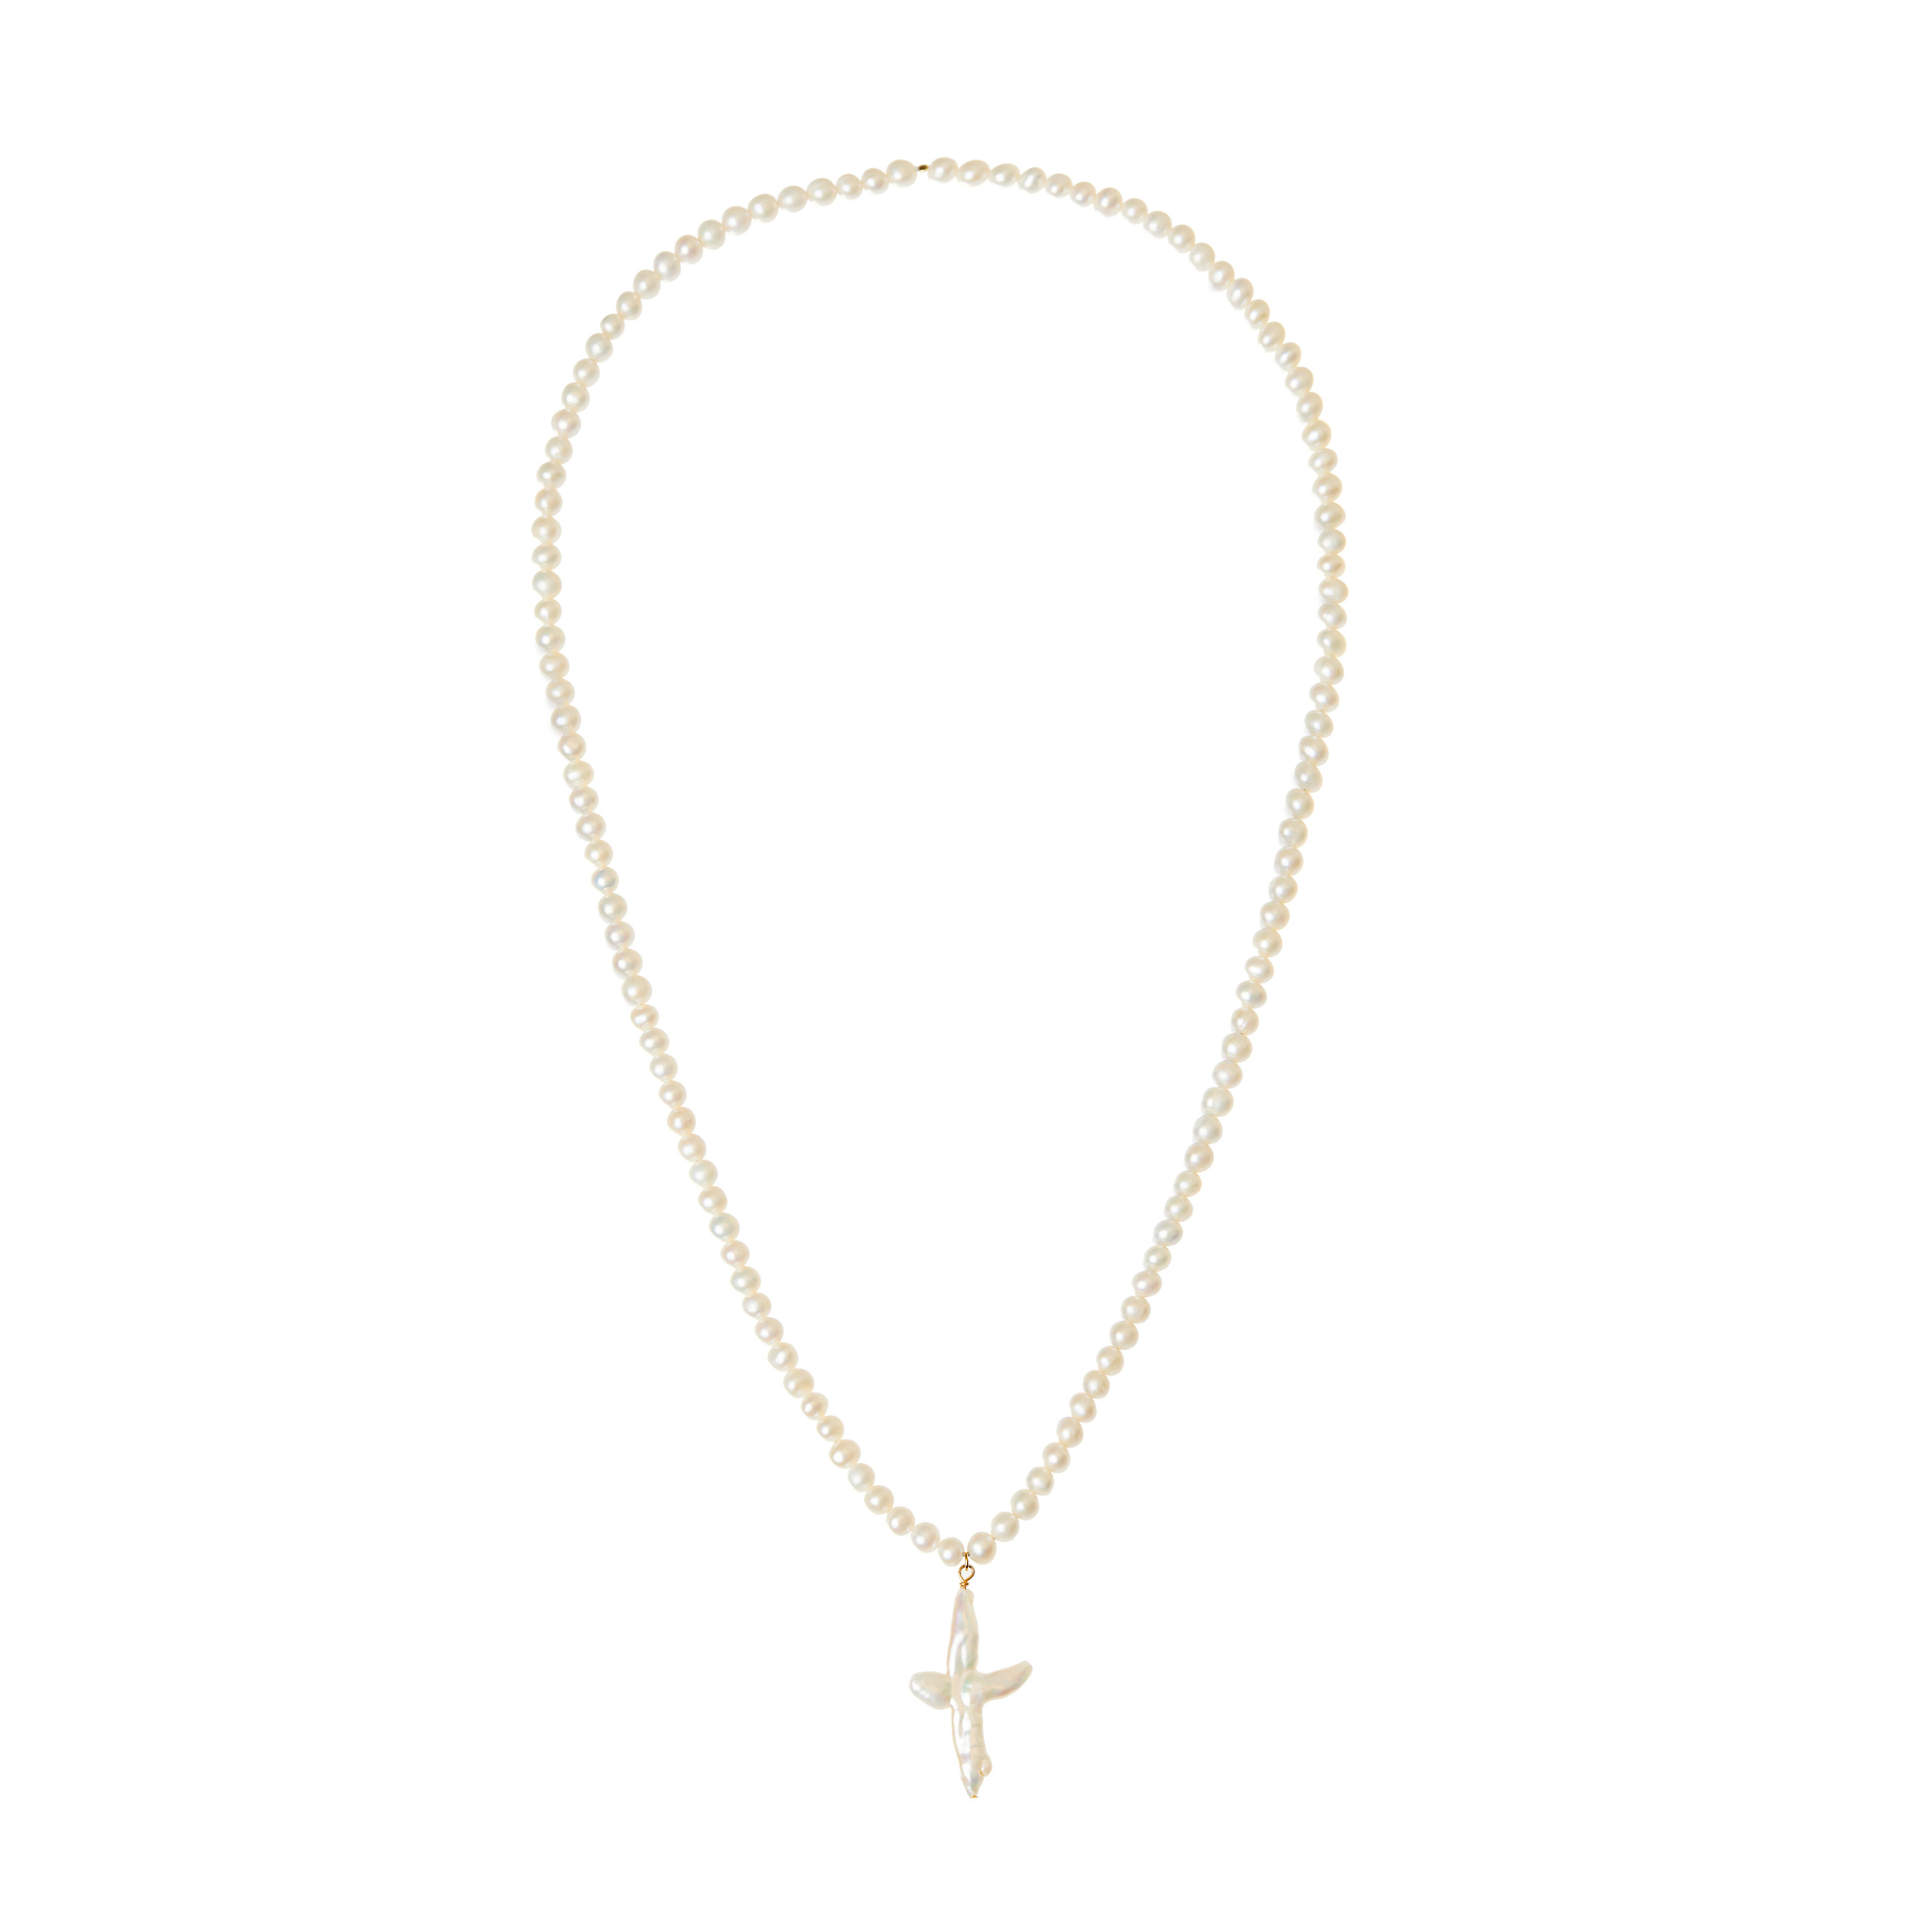 HOLLY JUNE Колье Naive Pearl Cross Necklace necklace dia pearl